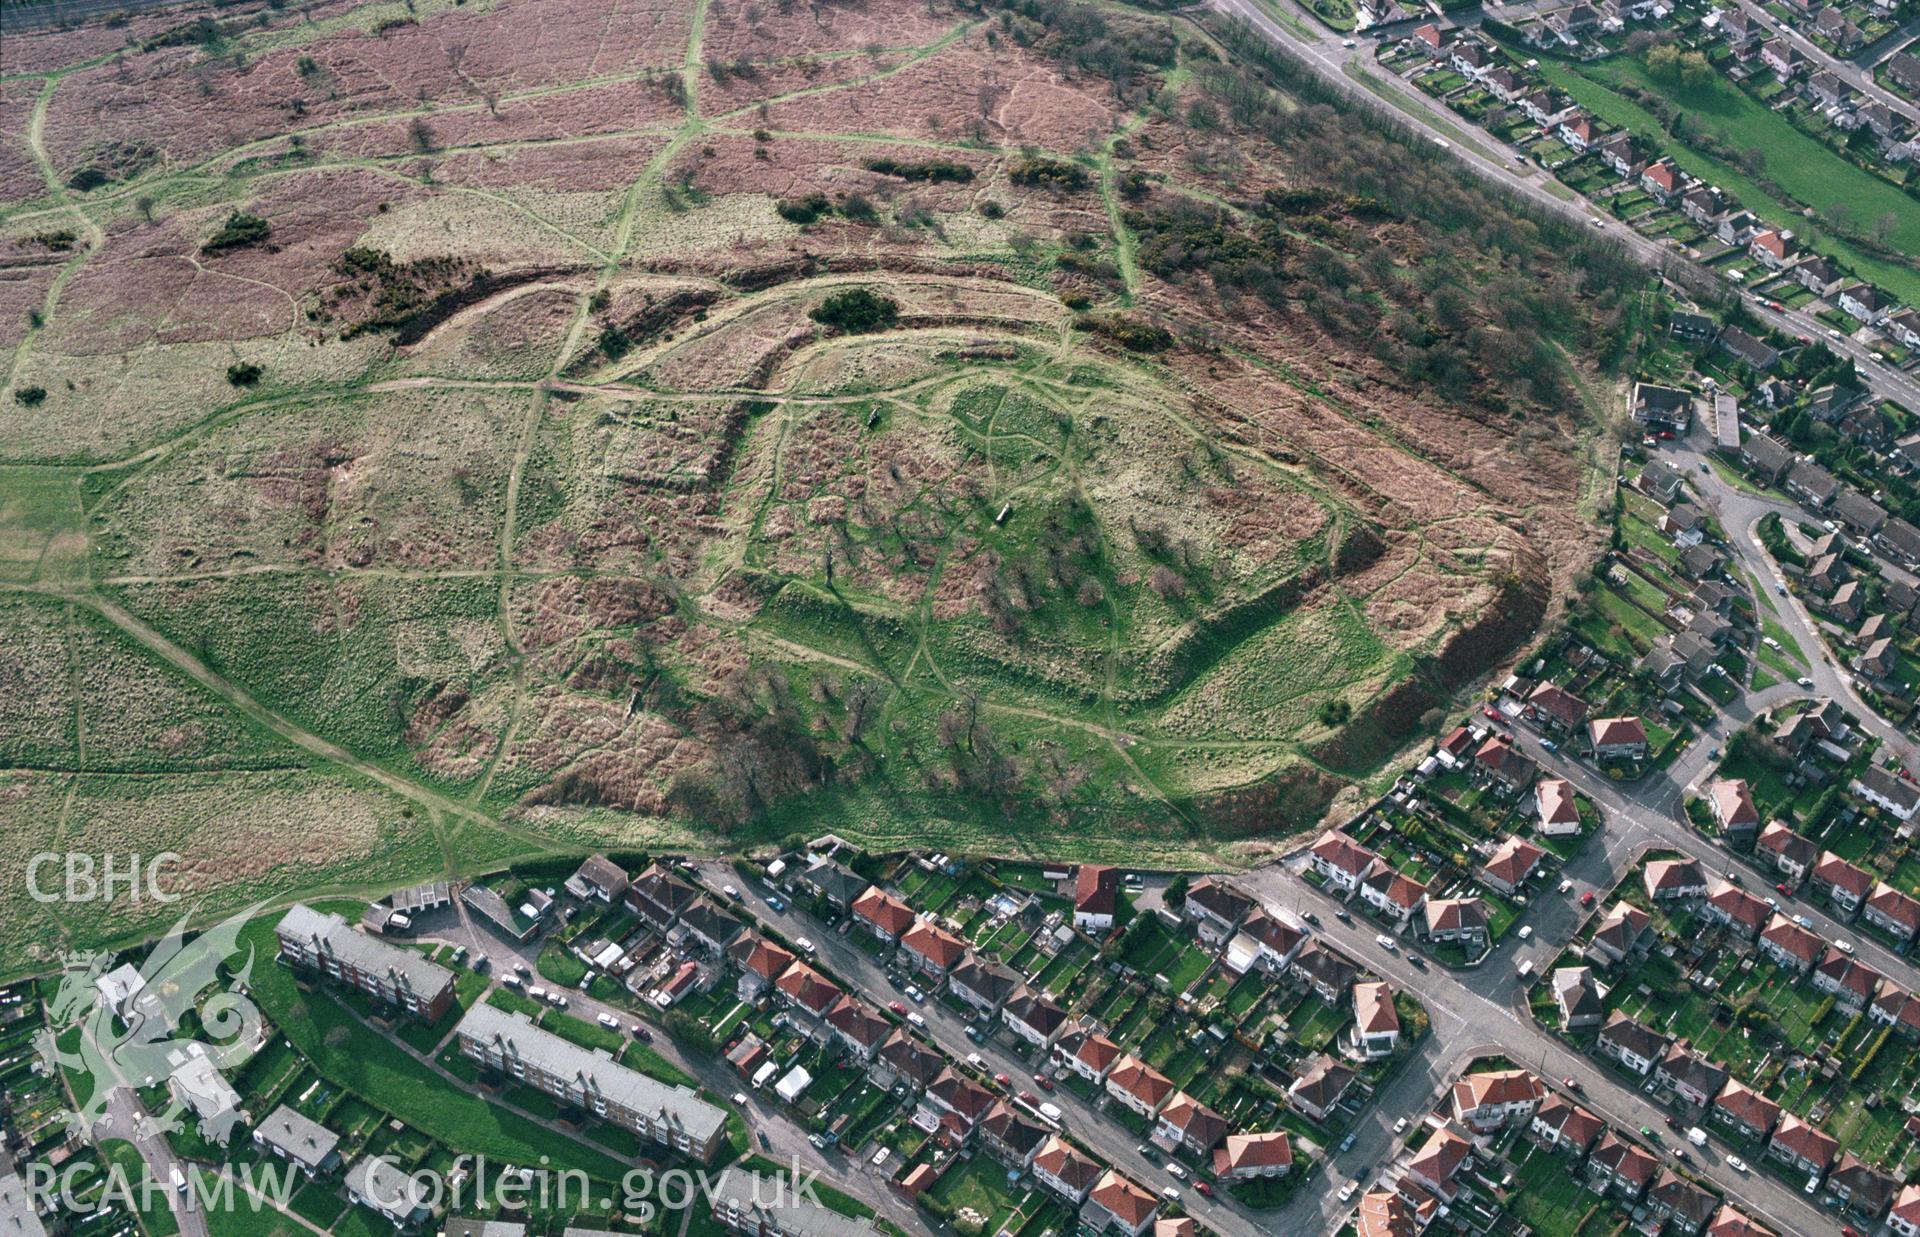 Slide of RCAHMW colour oblique aerial photograph of Tredegar Fort, taken by C.R. Musson, 26/3/1994.